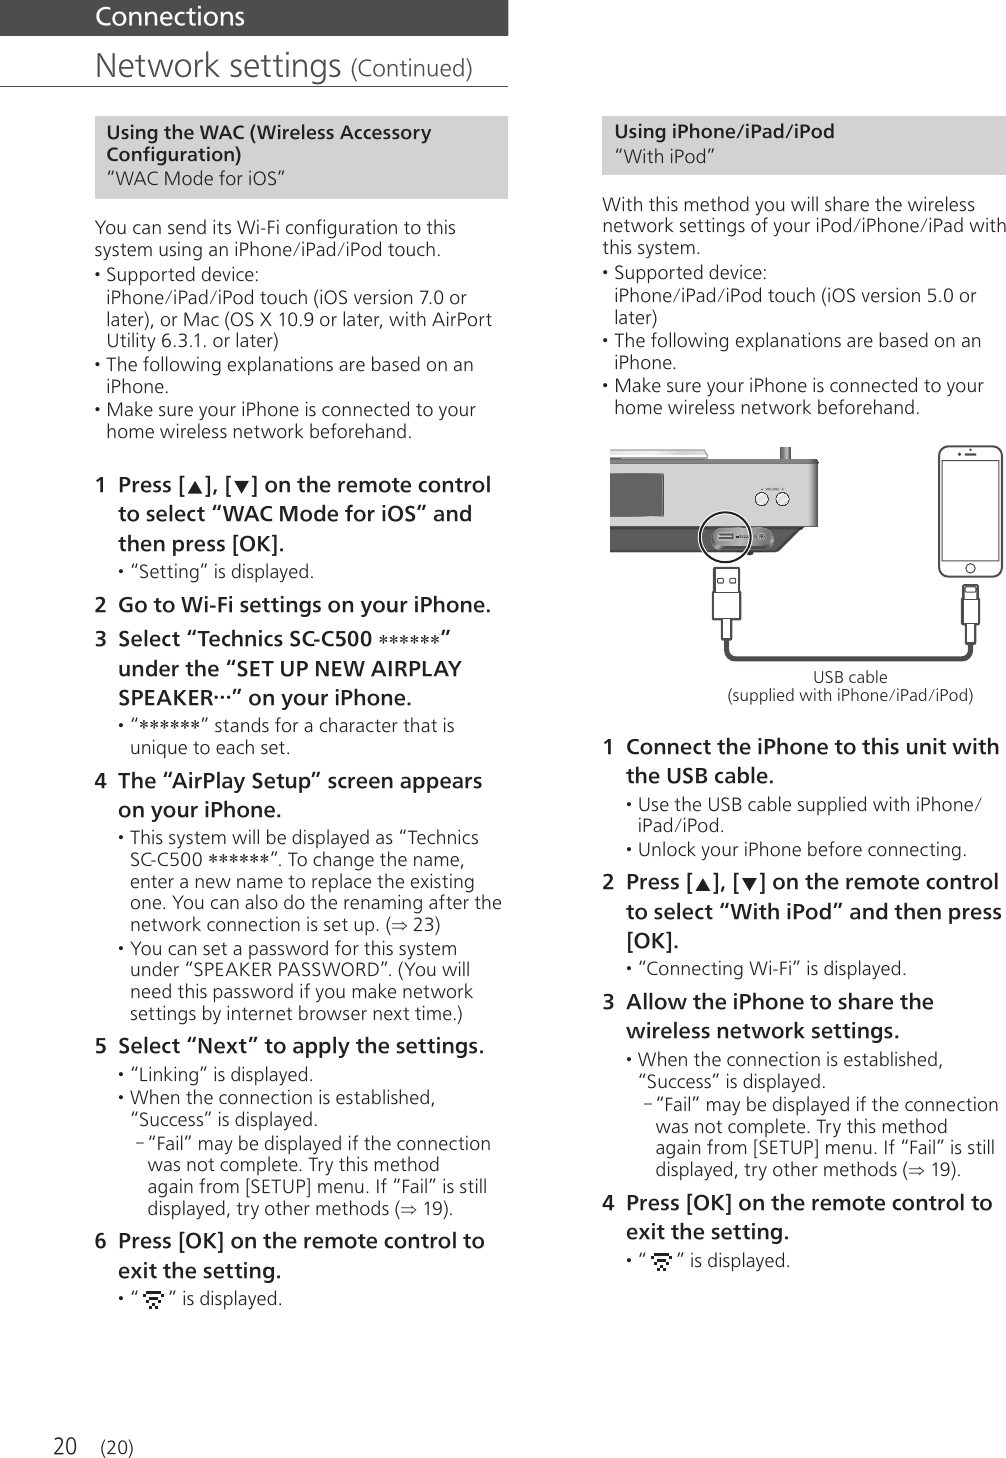 20  Connections  Network settings (Continued)  Using the WAC (Wireless Accessory Configuration) “WAC Mode for iOS” You can send its Wi-Fi configuration to this system using an iPhone/iPad/iPod touch. • Supported device: iPhone/iPad/iPod touch (iOS version 7.0 or later), or Mac (OS X 10.9 or later, with AirPort Utility 6.3.1. or later) • The following explanations are based on an iPhone. • Make sure your iPhone is connected to your home wireless network beforehand. 1 Press [ ], [ ] on the remote control to select “WAC Mode for iOS” and then press [OK]. • “Setting” is displayed. 2 Go to Wi-Fi settings on your iPhone. 3 Select “Technics SC-C500 ******” under the “SET UP NEW AIRPLAY SPEAKER…” on your iPhone. • “******” stands for a character that is unique to each set. 4 The “AirPlay Setup” screen appears on your iPhone. • This system will be displayed as “Technics SC-C500 ******”. To change the name, enter a new name to replace the existing one. You can also do the renaming after the network connection is set up. ( 23) • You can set a password for this system under “SPEAKER PASSWORD”. (You will need this password if you make network settings by internet browser next time.) 5 Select “Next” to apply the settings. • “Linking” is displayed. • When the connection is established, “Success” is displayed. - “Fail” may be displayed if the connection was not complete. Try this method again from [SETUP] menu. If “Fail” is still displayed, try other methods ( 19). 6 Press [OK] on the remote control to exit the setting. • “ ” is displayed.  Using iPhone/iPad/iPod “With iPod” With this method you will share the wireless network settings of your iPod/iPhone/iPad with this system. • Supported device: iPhone/iPad/iPod touch (iOS version 5.0 or later) • The following explanations are based on an iPhone. • Make sure your iPhone is connected to your home wireless network beforehand.  USB cable (supplied with iPhone/iPad/iPod) 1 Connect the iPhone to this unit with the USB cable. • Use the USB cable supplied with iPhone/iPad/iPod. • Unlock your iPhone before connecting. 2 Press [ ], [ ] on the remote control to select “With iPod” and then press [OK]. • “Connecting Wi-Fi” is displayed. 3 Allow the iPhone to share the wireless network settings. • When the connection is established, “Success” is displayed. - “Fail” may be displayed if the connection was not complete. Try this method again from [SETUP] menu. If “Fail” is still displayed, try other methods ( 19). 4 Press [OK] on the remote control to exit the setting. • “ ” is displayed. (20)